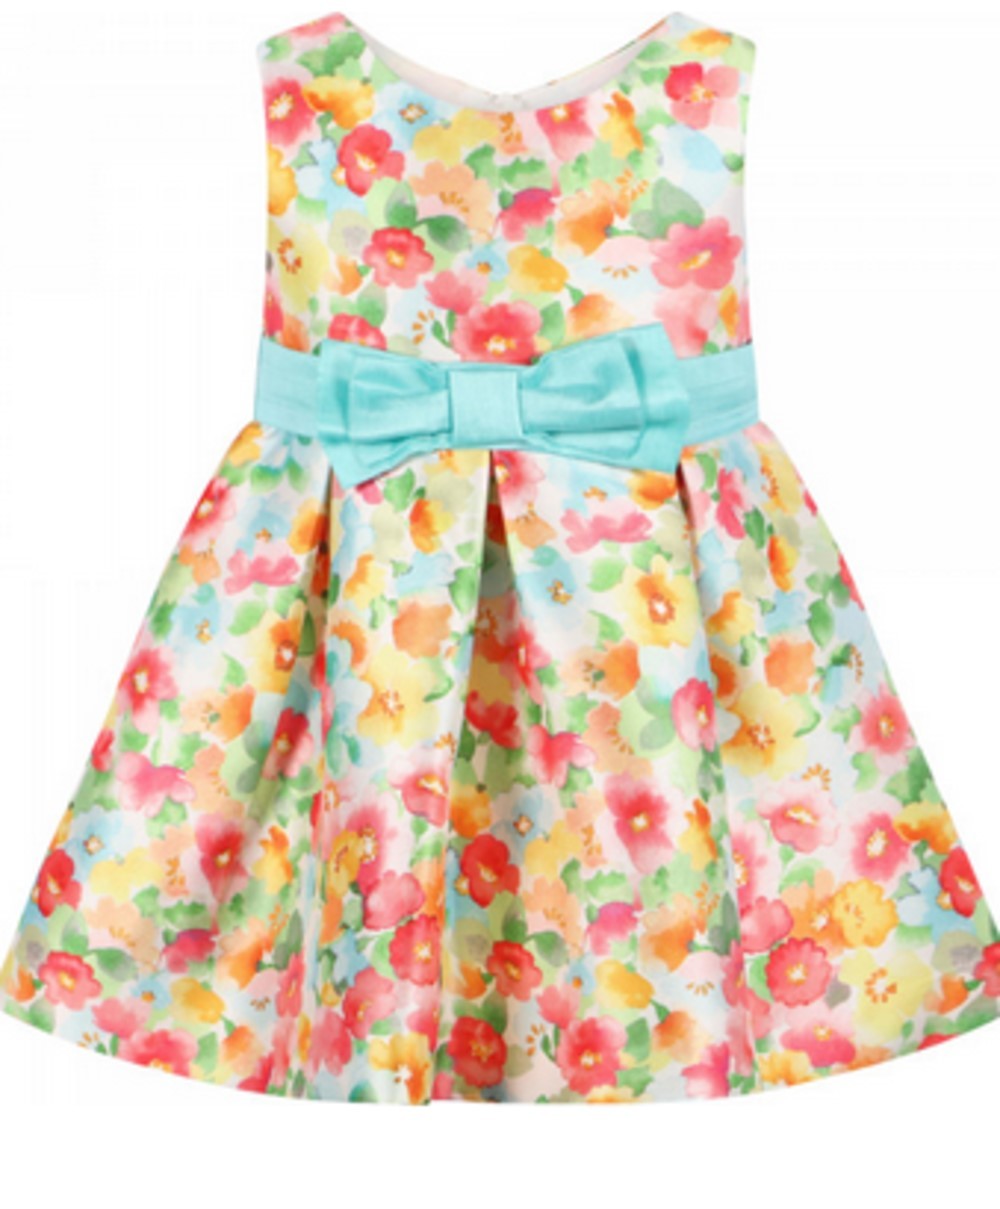 ABEL & LULA 5013 BABY GIRLS WATERCOLOR FLORAL PRINT SPECIAL OCCASION DRESS